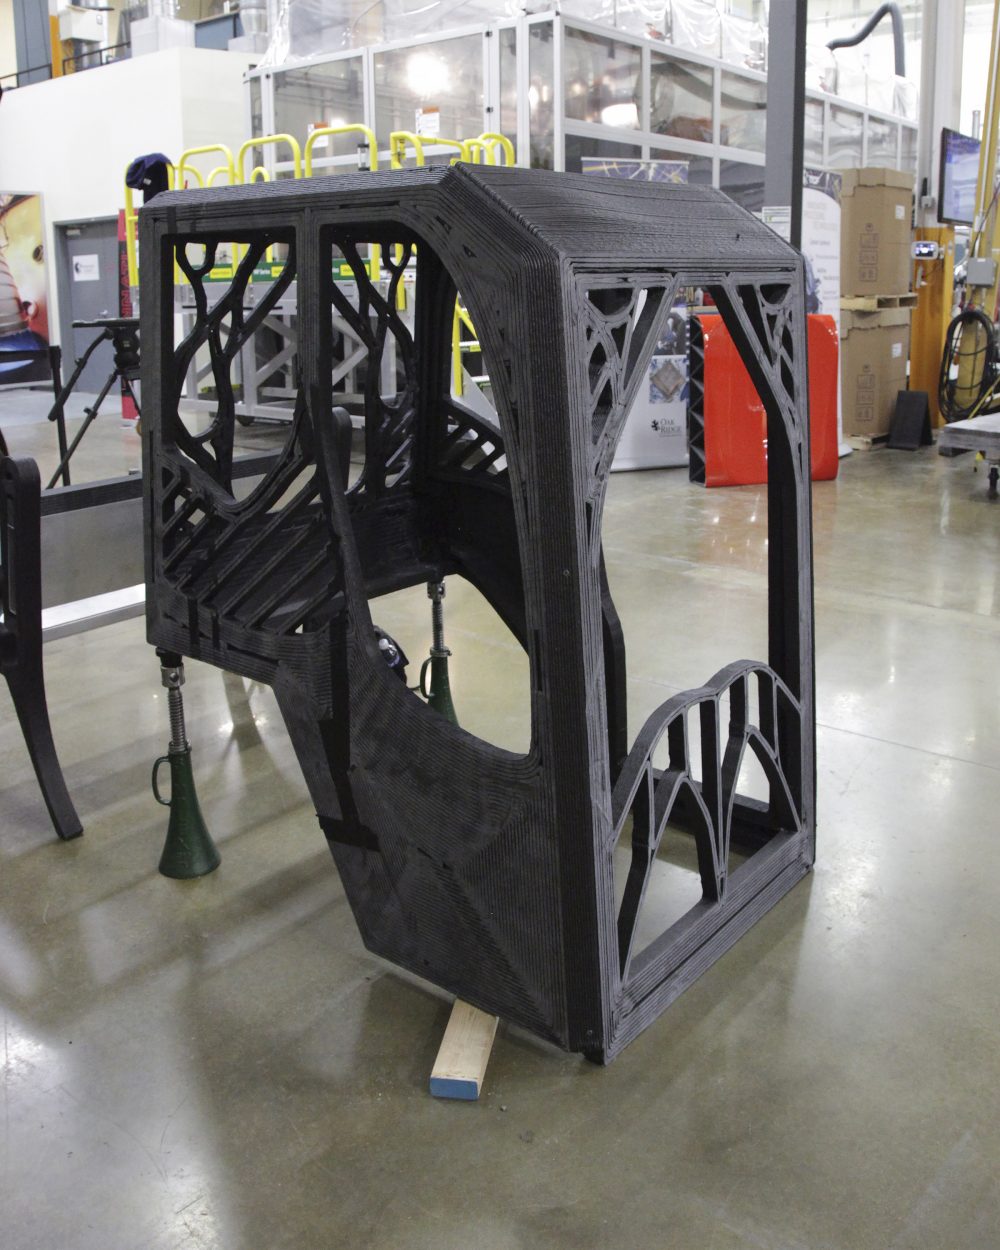 3 things you should know about 3D Printing Construction Equipment